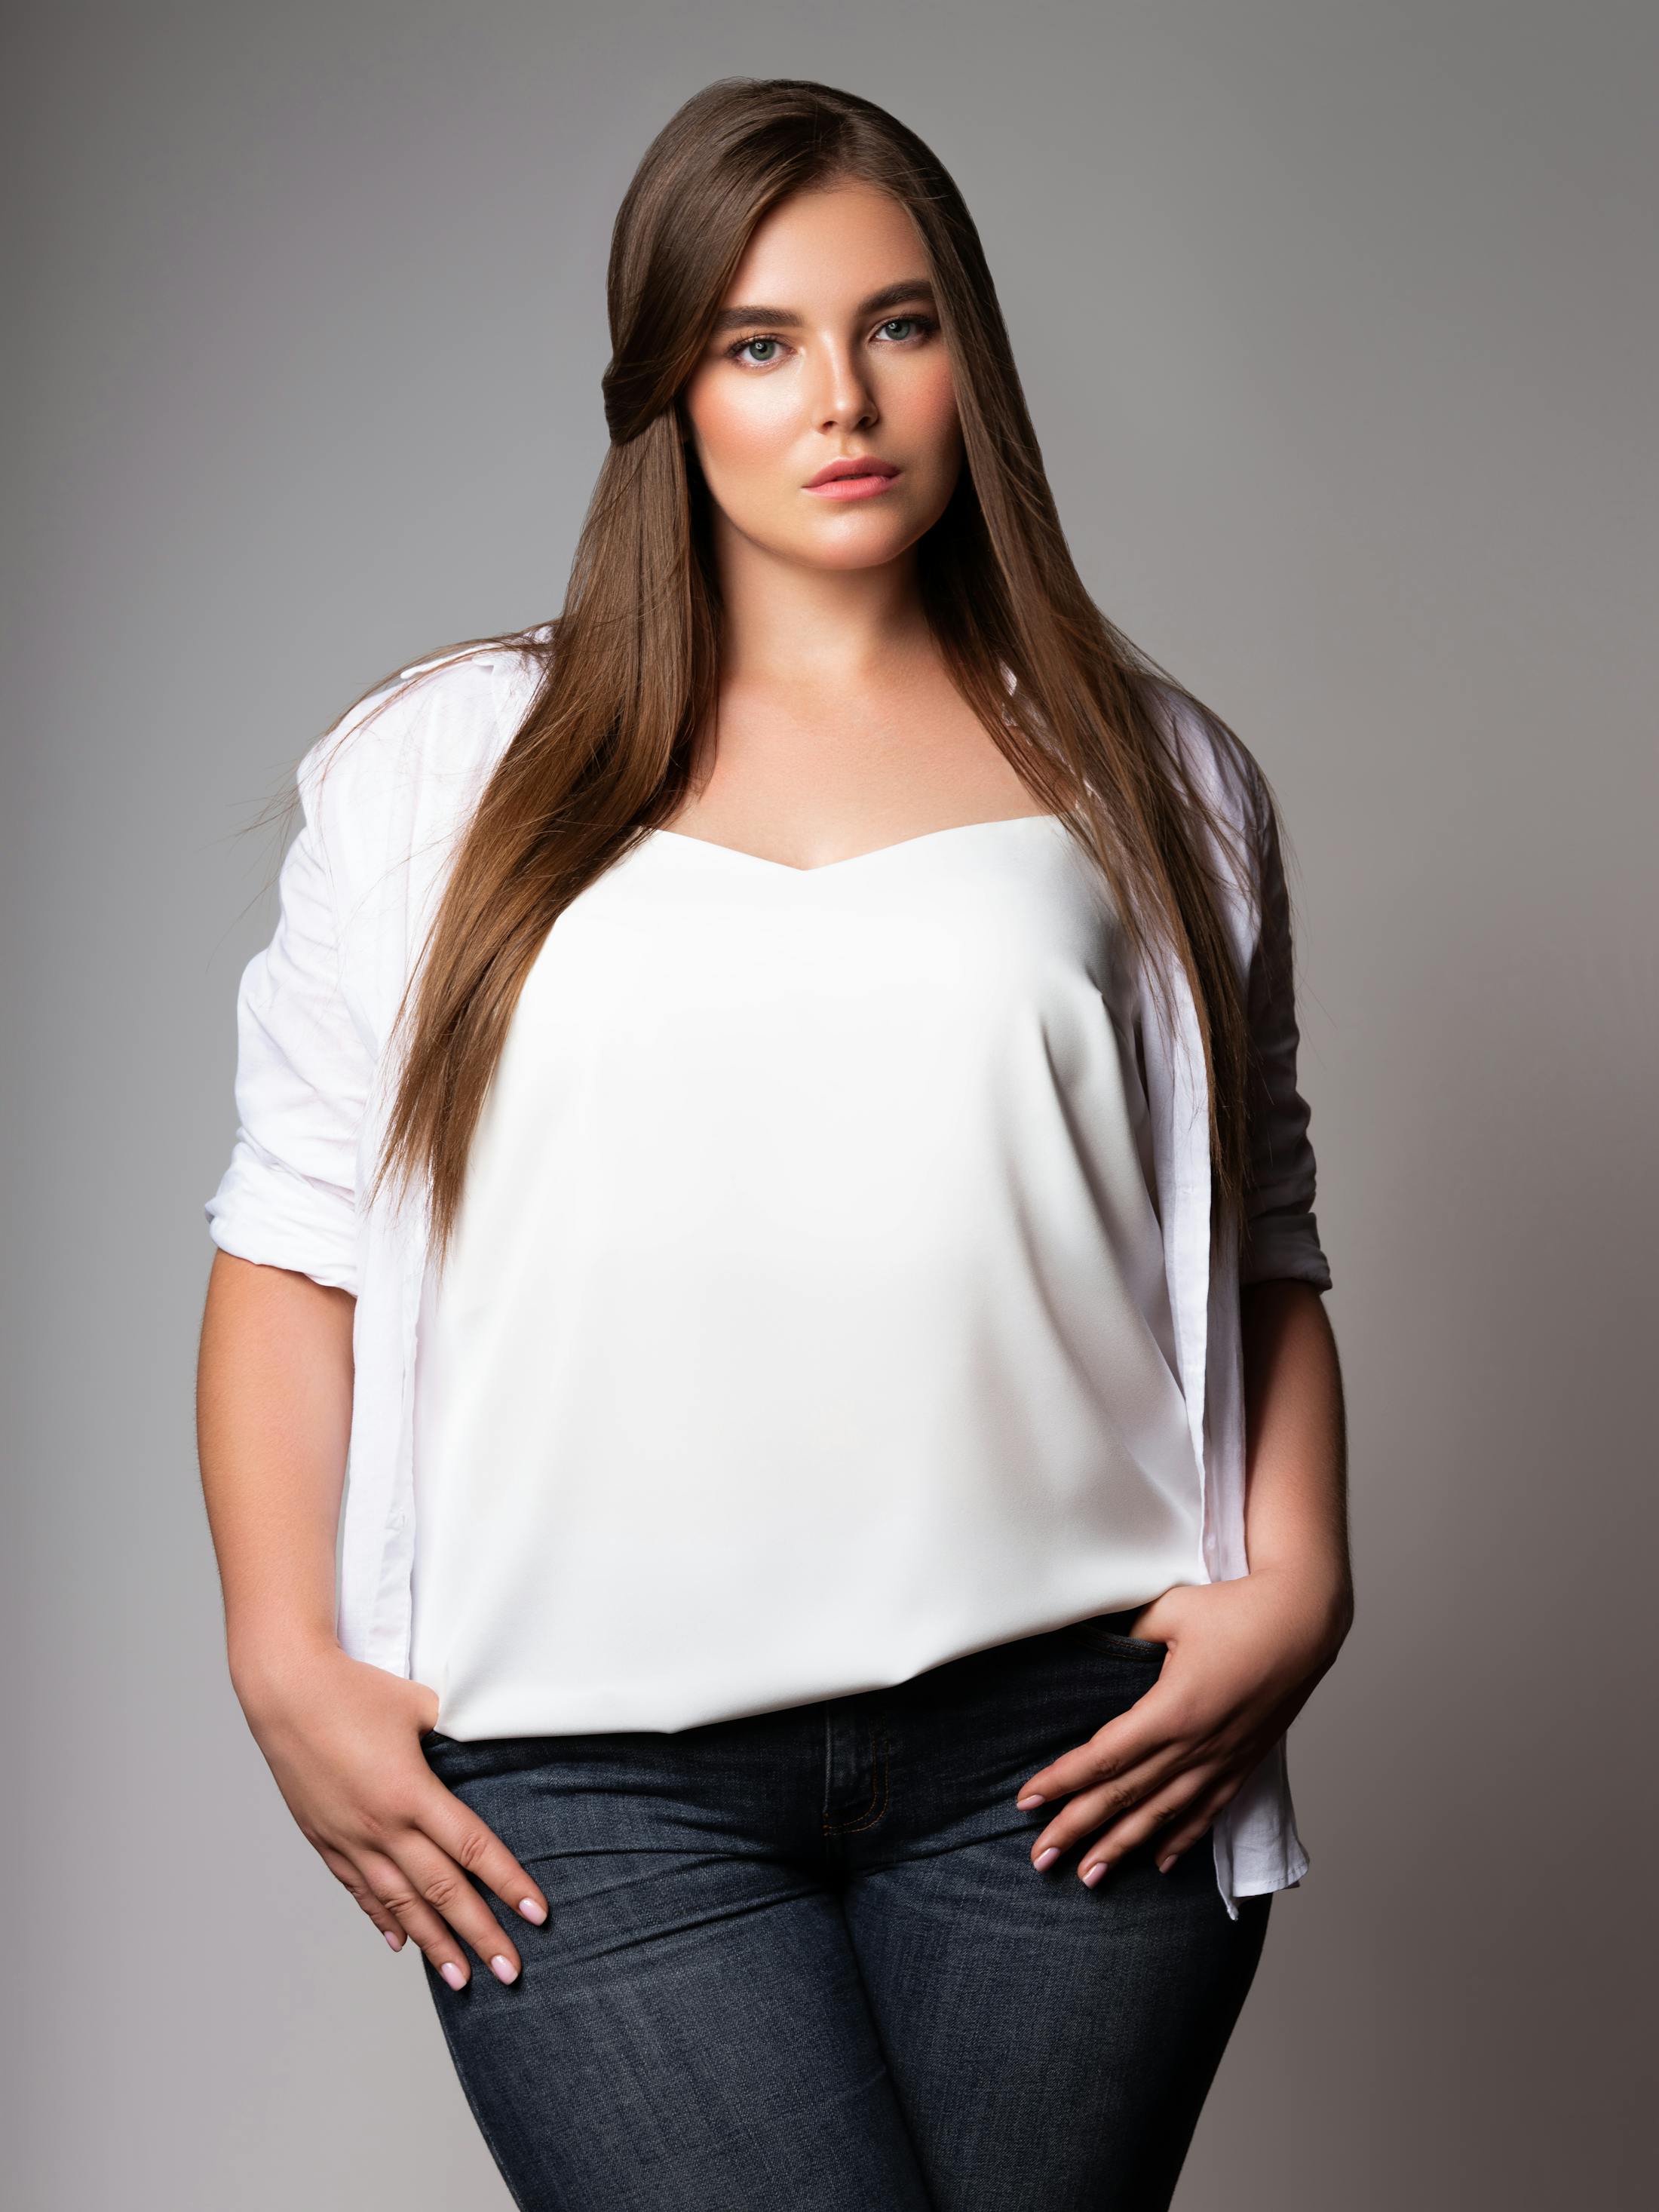 Woman with brown hair and white shirt